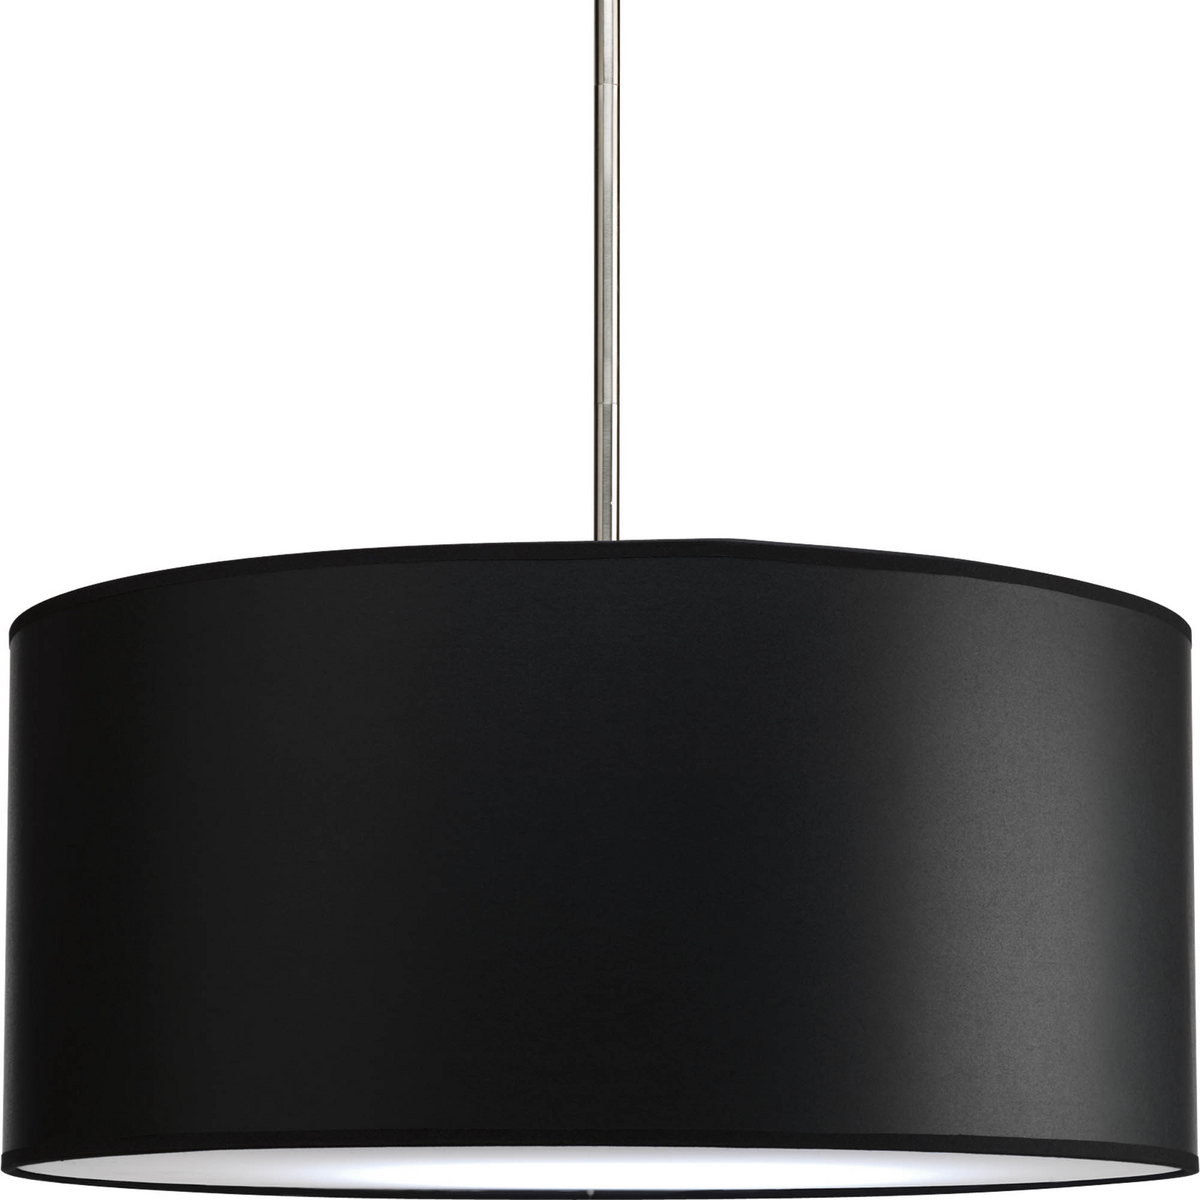 The Markor Series is a modular pendant system. The versatile series allow the choice of shades and stem kits. This 22 in shade with Black Parchment Paper is inspired by mid-century design. Acrylic bottom diffuser. This shade can be used with a variety of stem kits from 1 to 3 light in CFL, LED and incandescent light sources.